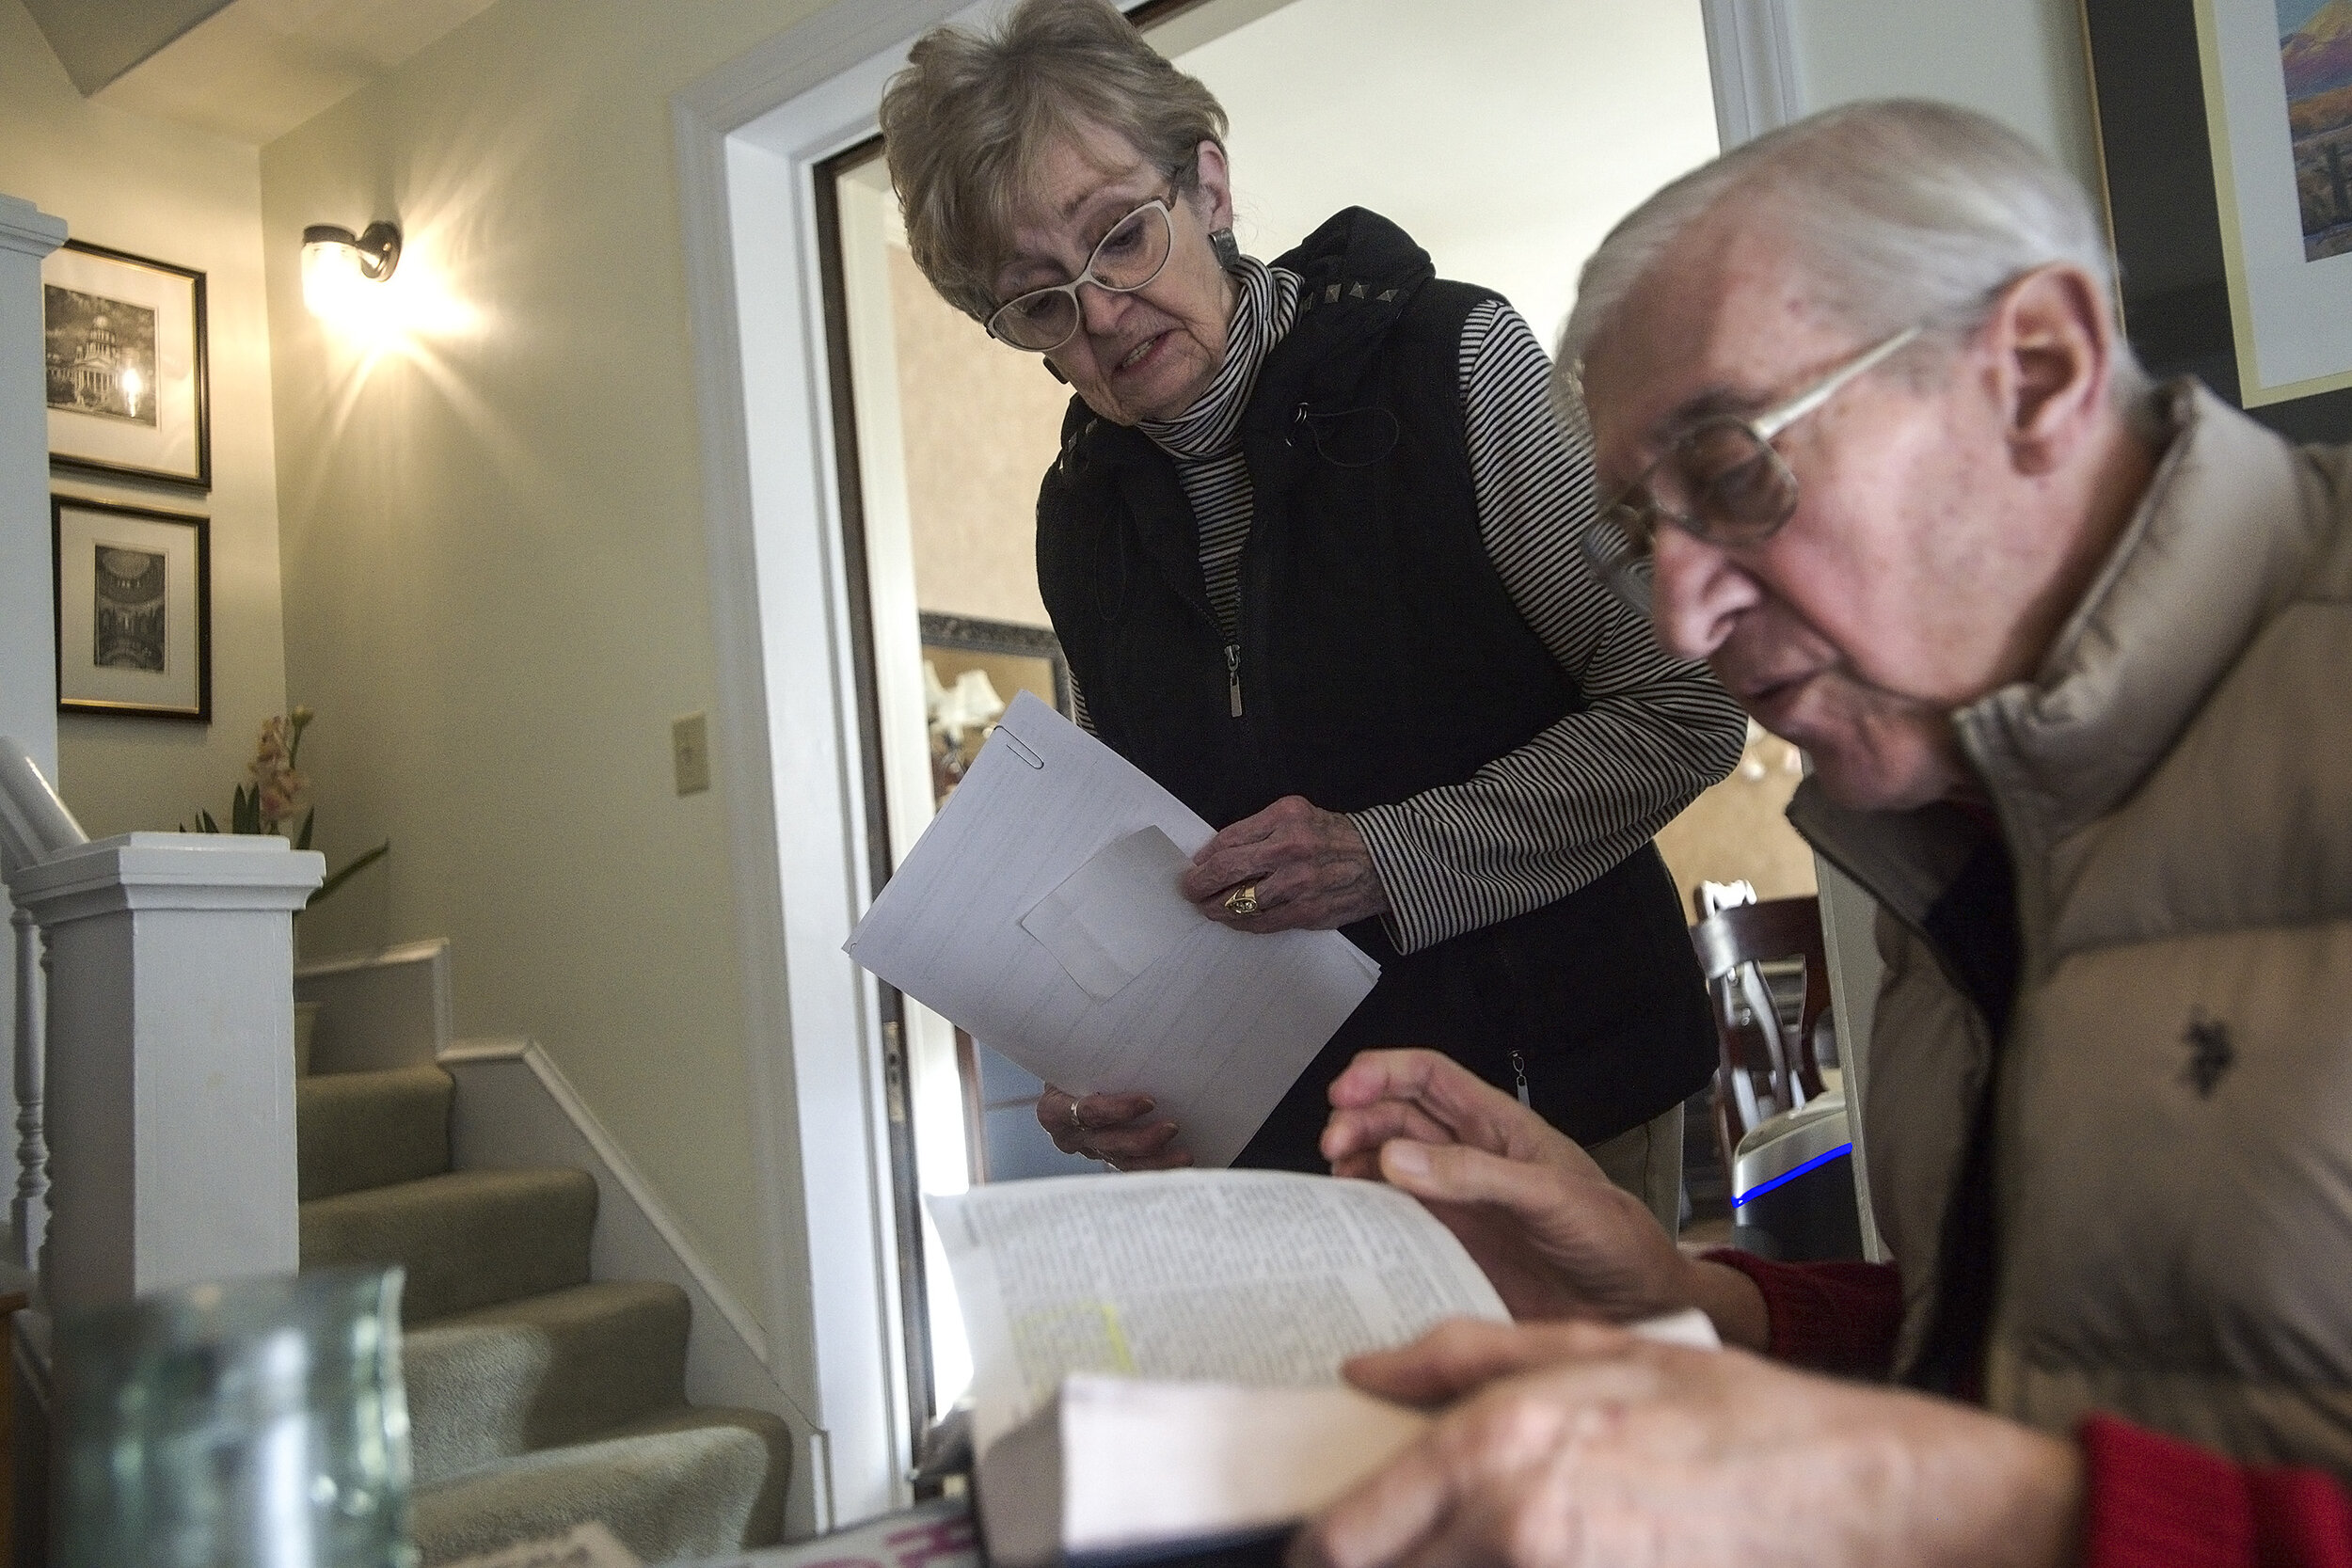  Judy Buchanan looks on as her husband, Rich, flips through a Bible on Friday, Feb. 2, 2018, at their home in Bloomington, Illinois. Rich Buchanan’s faith is helping him to live with his Alzheimer’s diagnosis. 